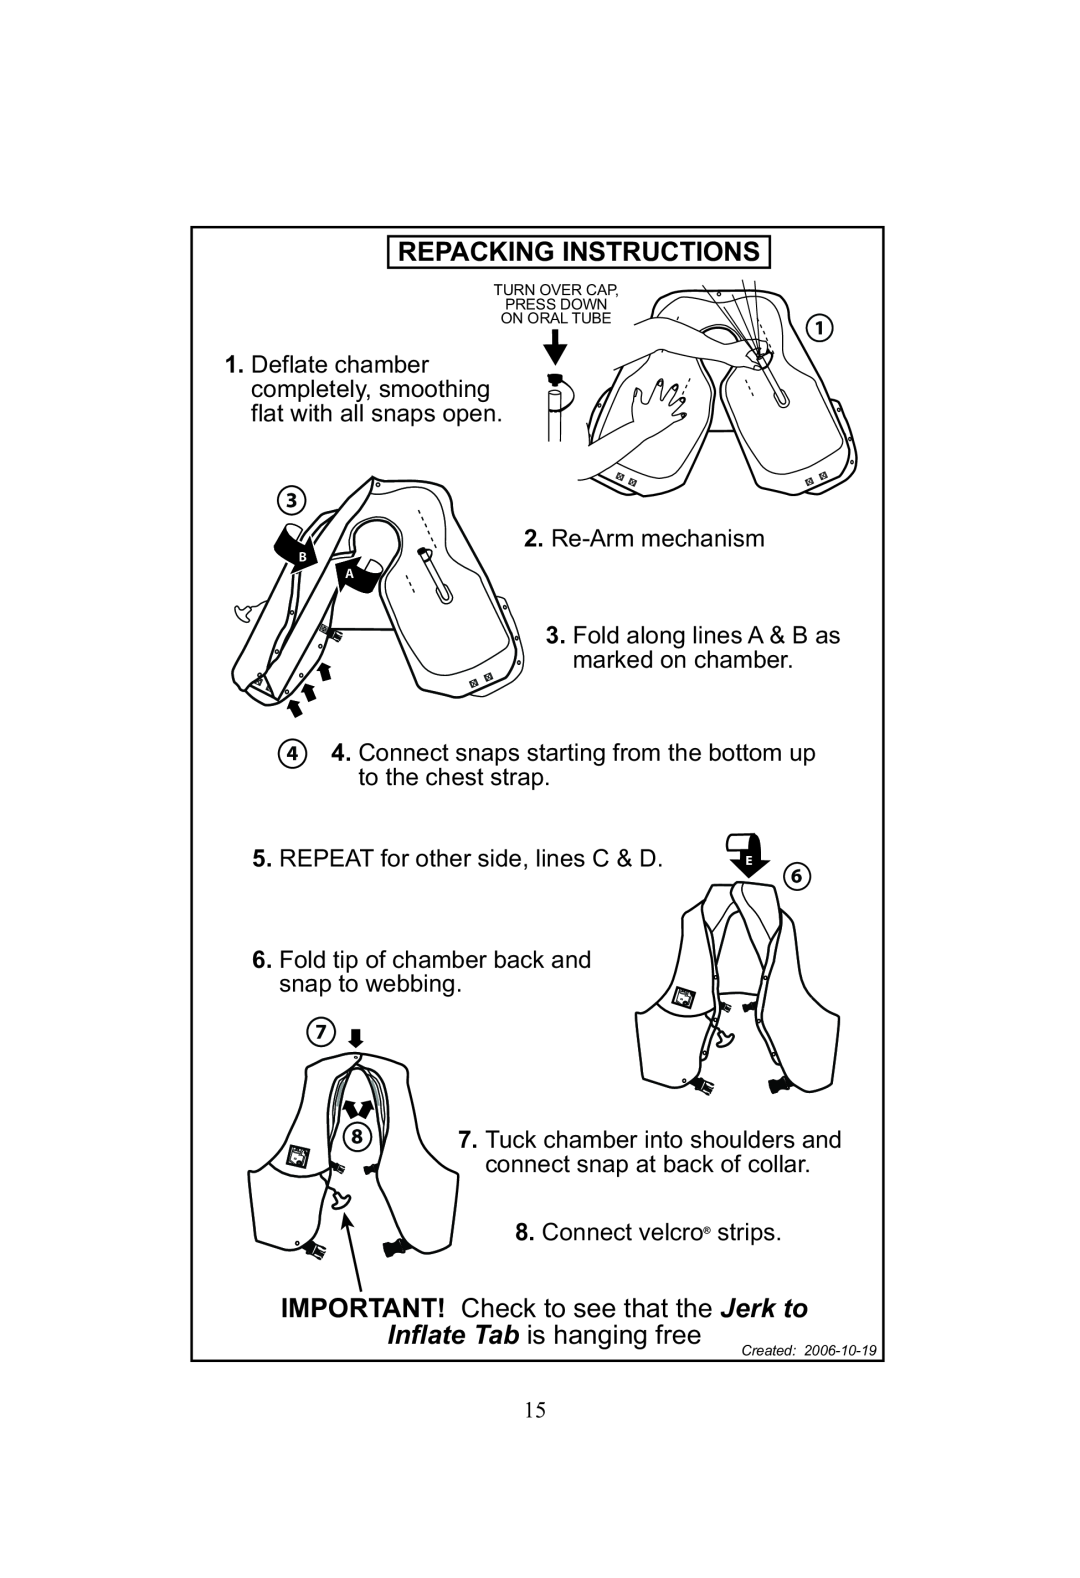 SOSpenders 33MSPT manual Repacking Instructions, IMPORTANT! Check to see that the Jerk to Inflate Tab is hanging free 